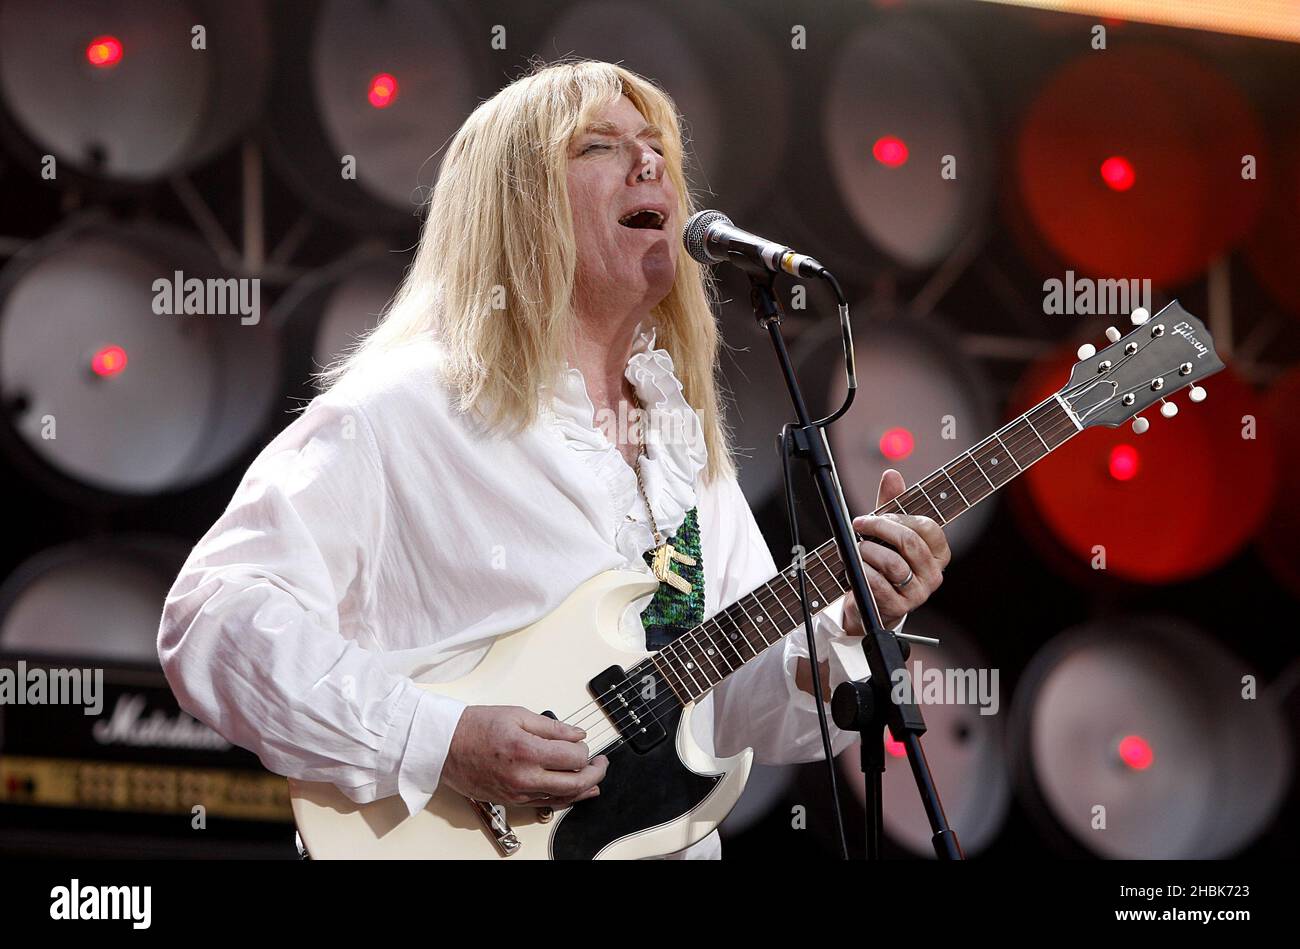 Michael McKean, member of the fictional band Spinal Tap performs during the charity concert at Wembley Stadium, London. Stock Photo